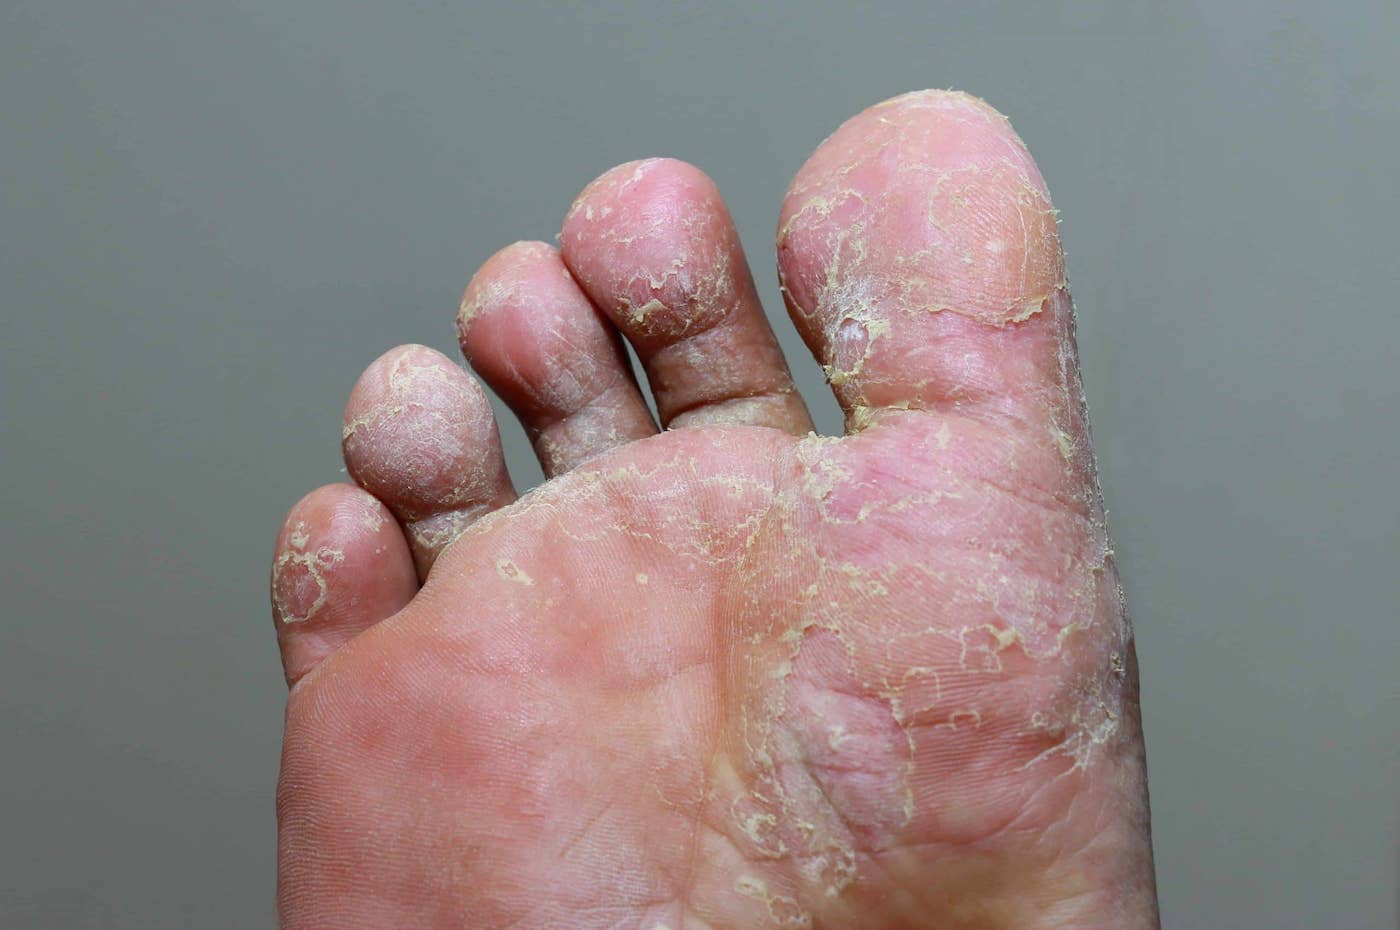 https://www.jawspodiatry.com/wp-content/uploads/2019/04/Guide-To-Foot-Fungus.jpeg